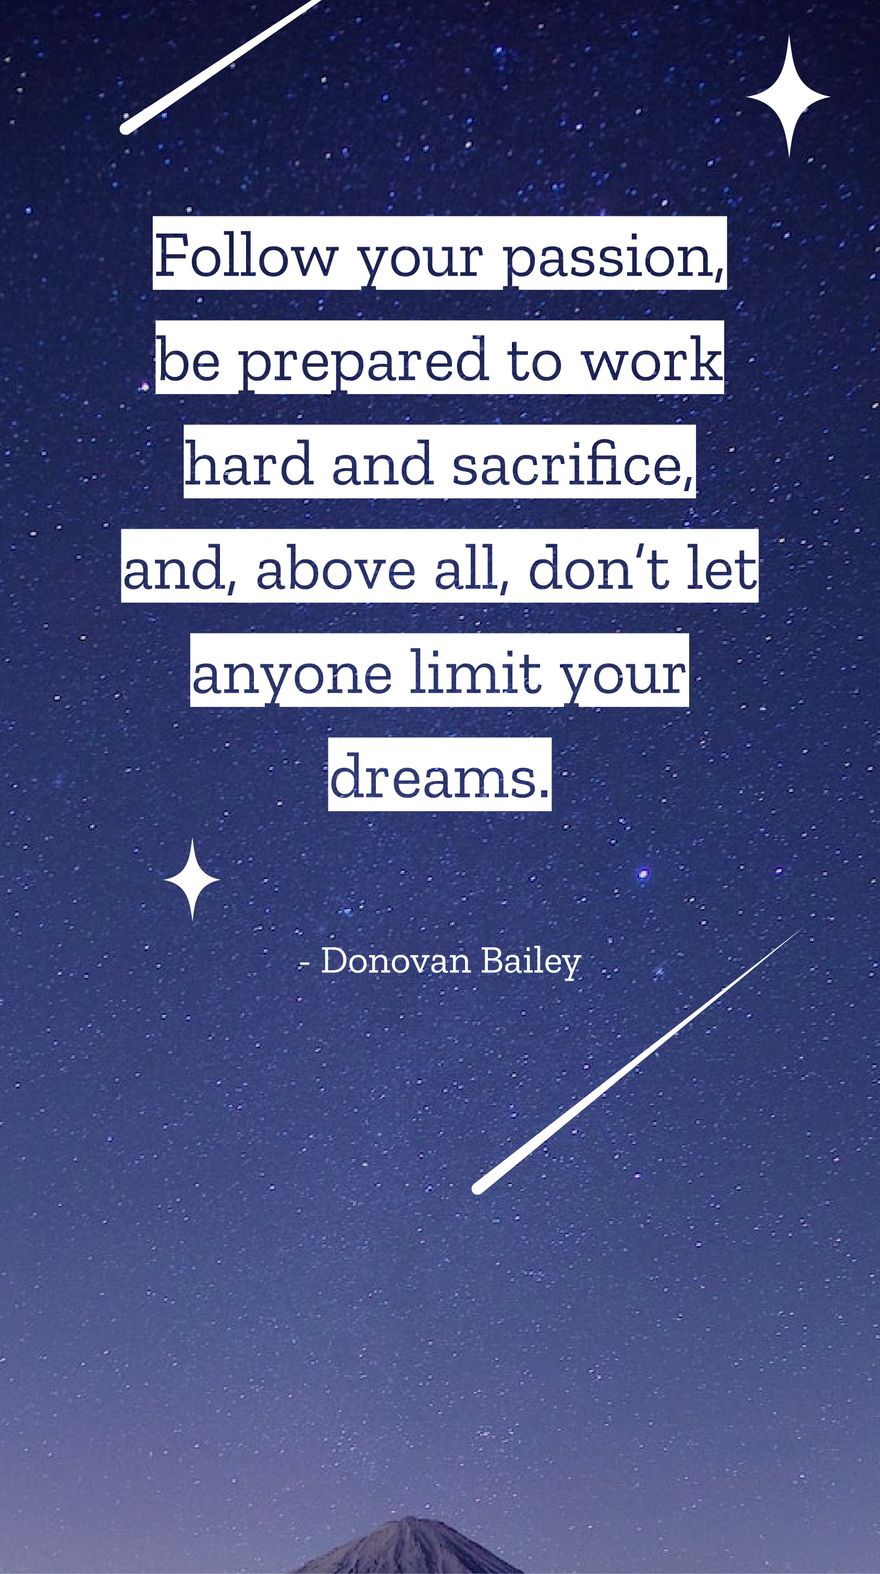 Donovan Bailey - Follow your passion, be prepared to work hard and sacrifice, and, above all, don’t let anyone limit your dreams. in JPG